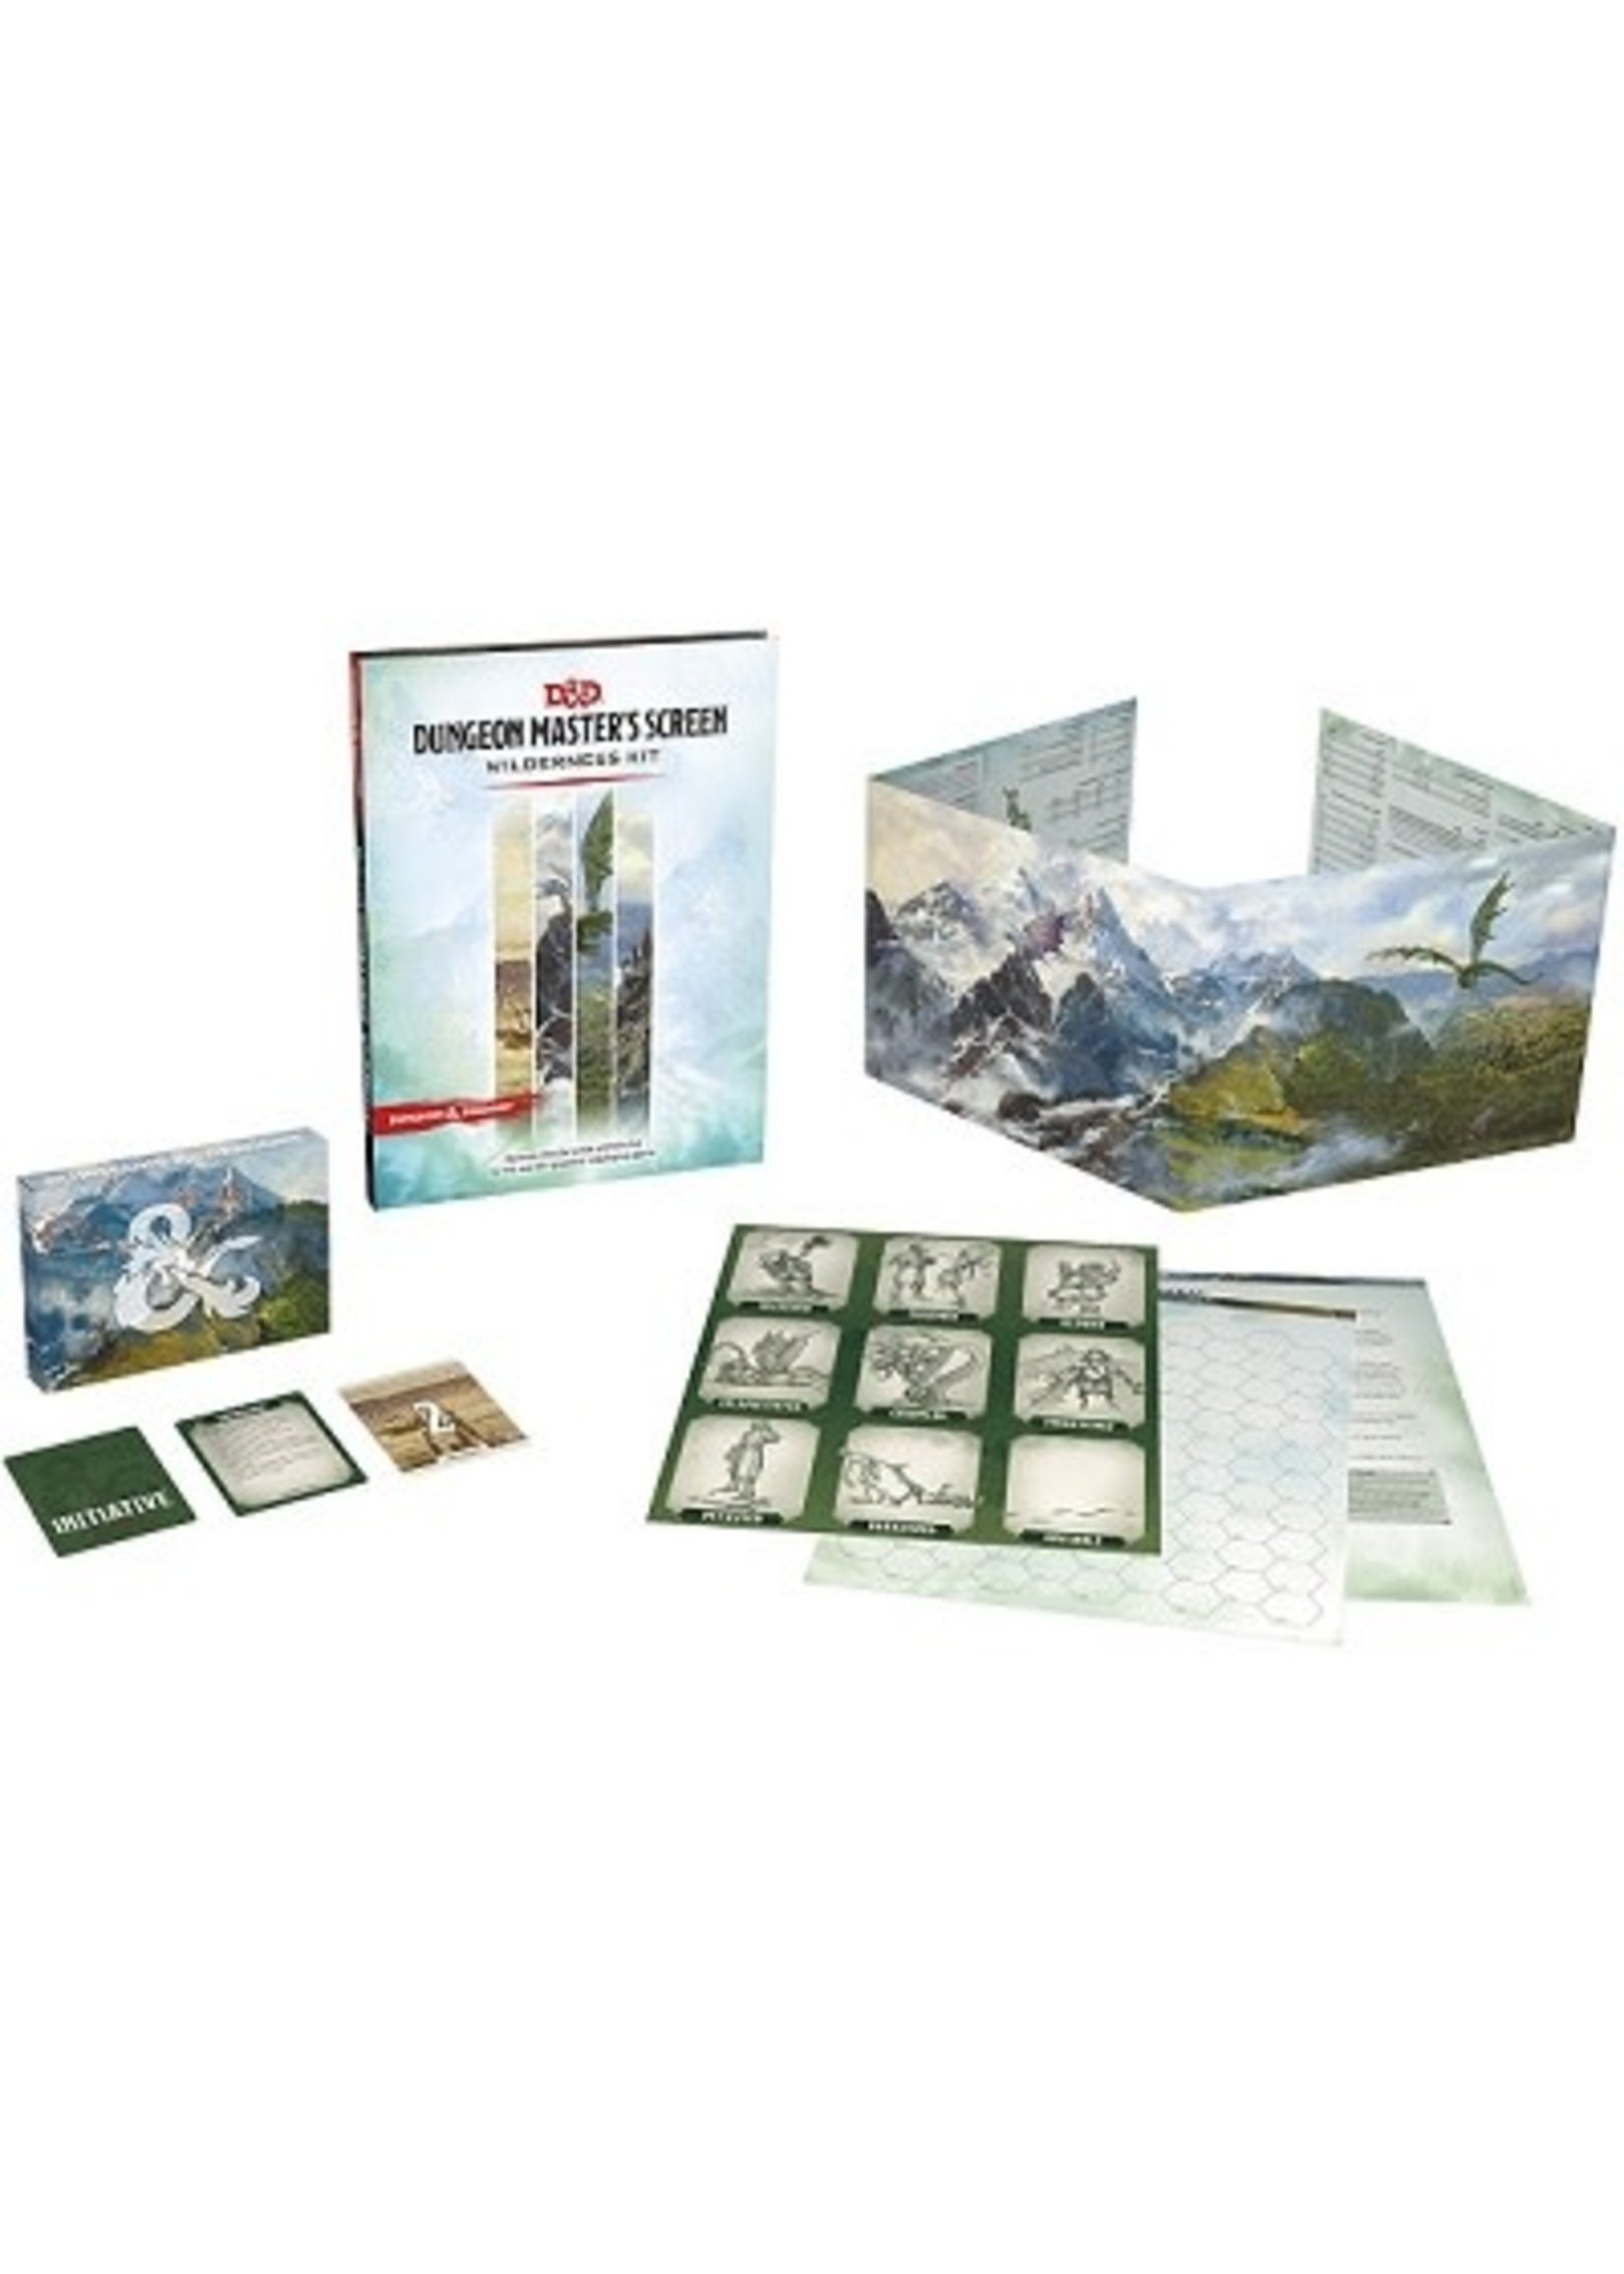 Wizards of the Coast Dungeon Master's Screen - Wilderness Kit - D&D Dungeons & Dragons (ENG)